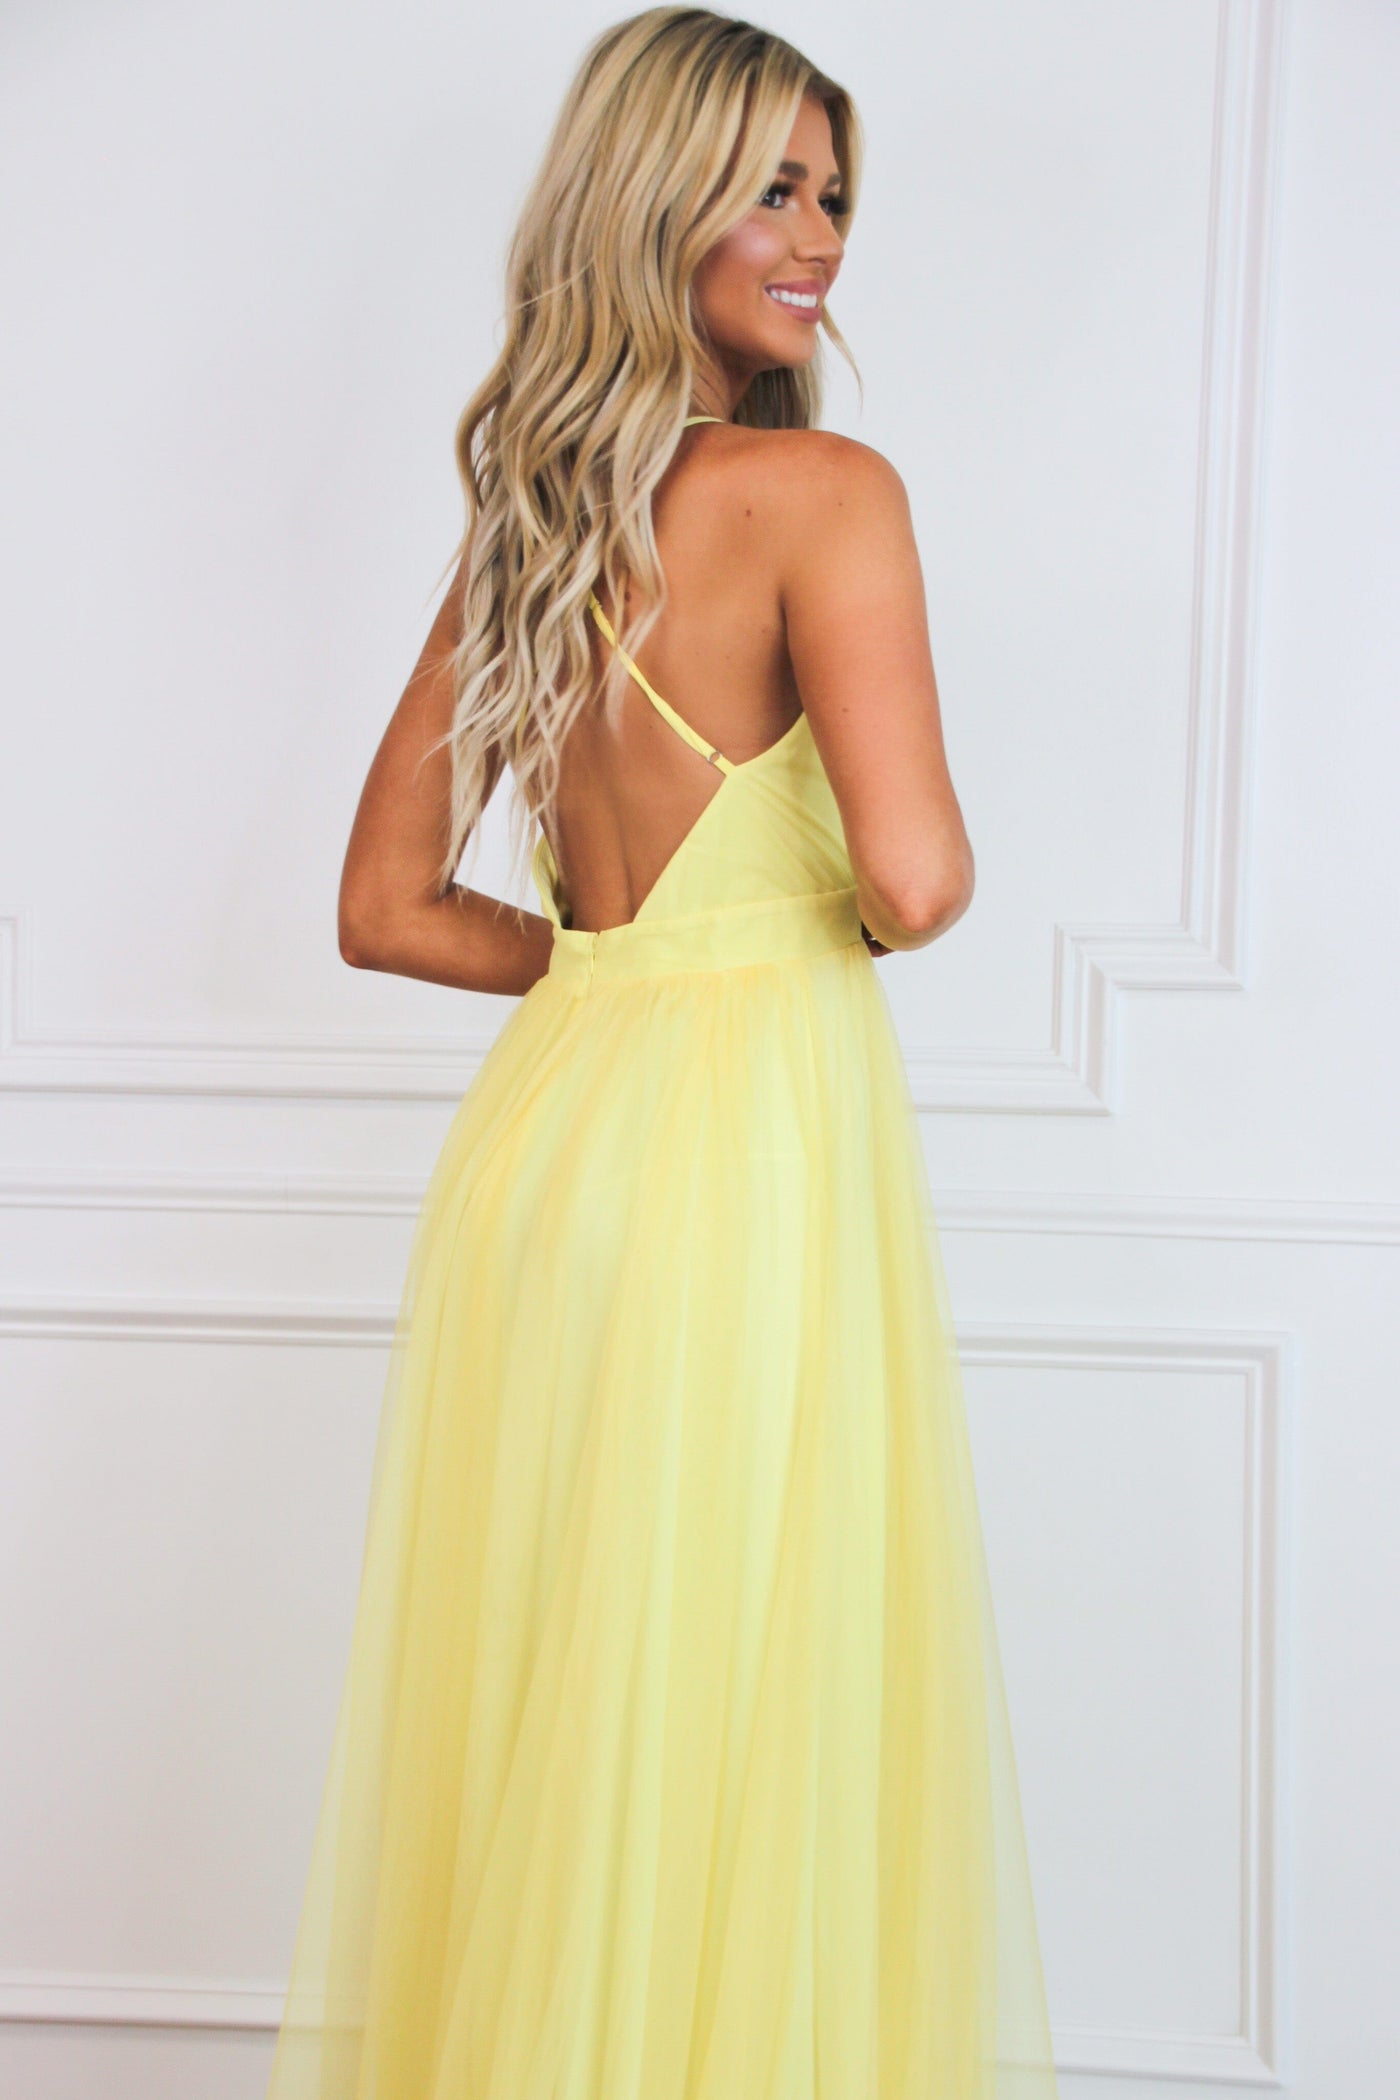 Forever Love Maxi Dress: Yellow - Bella and Bloom Boutique